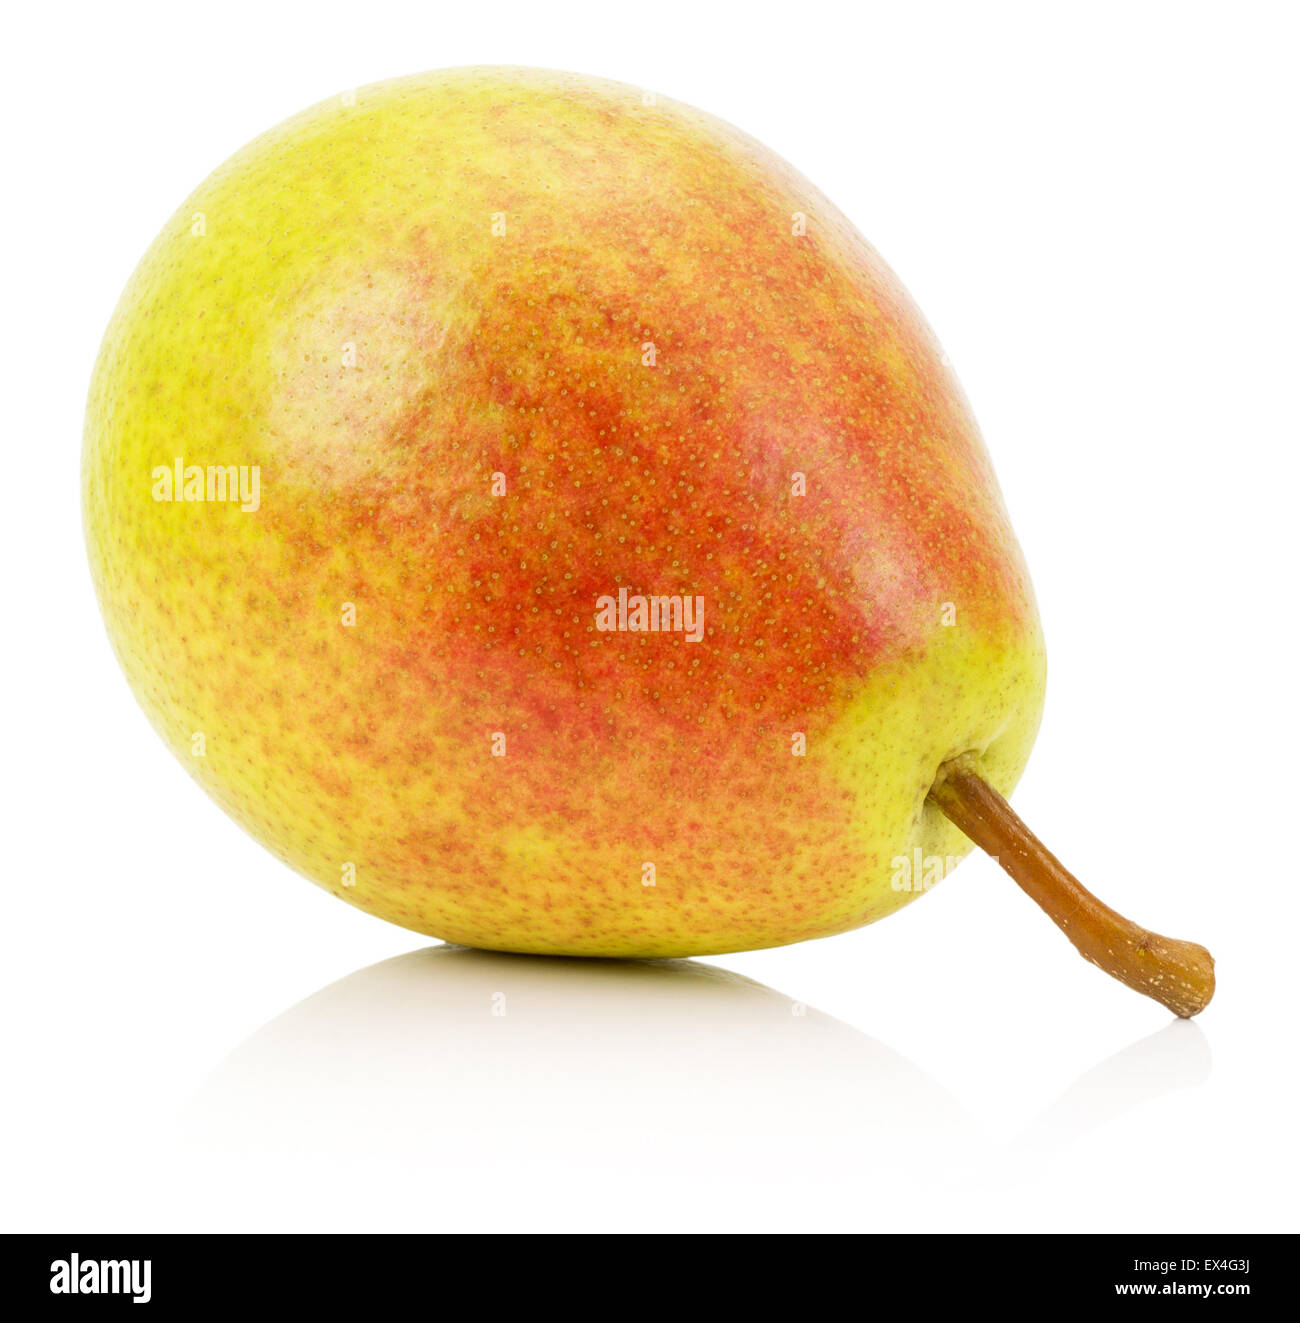 juicy pear isolated on the white background. Stock Photo